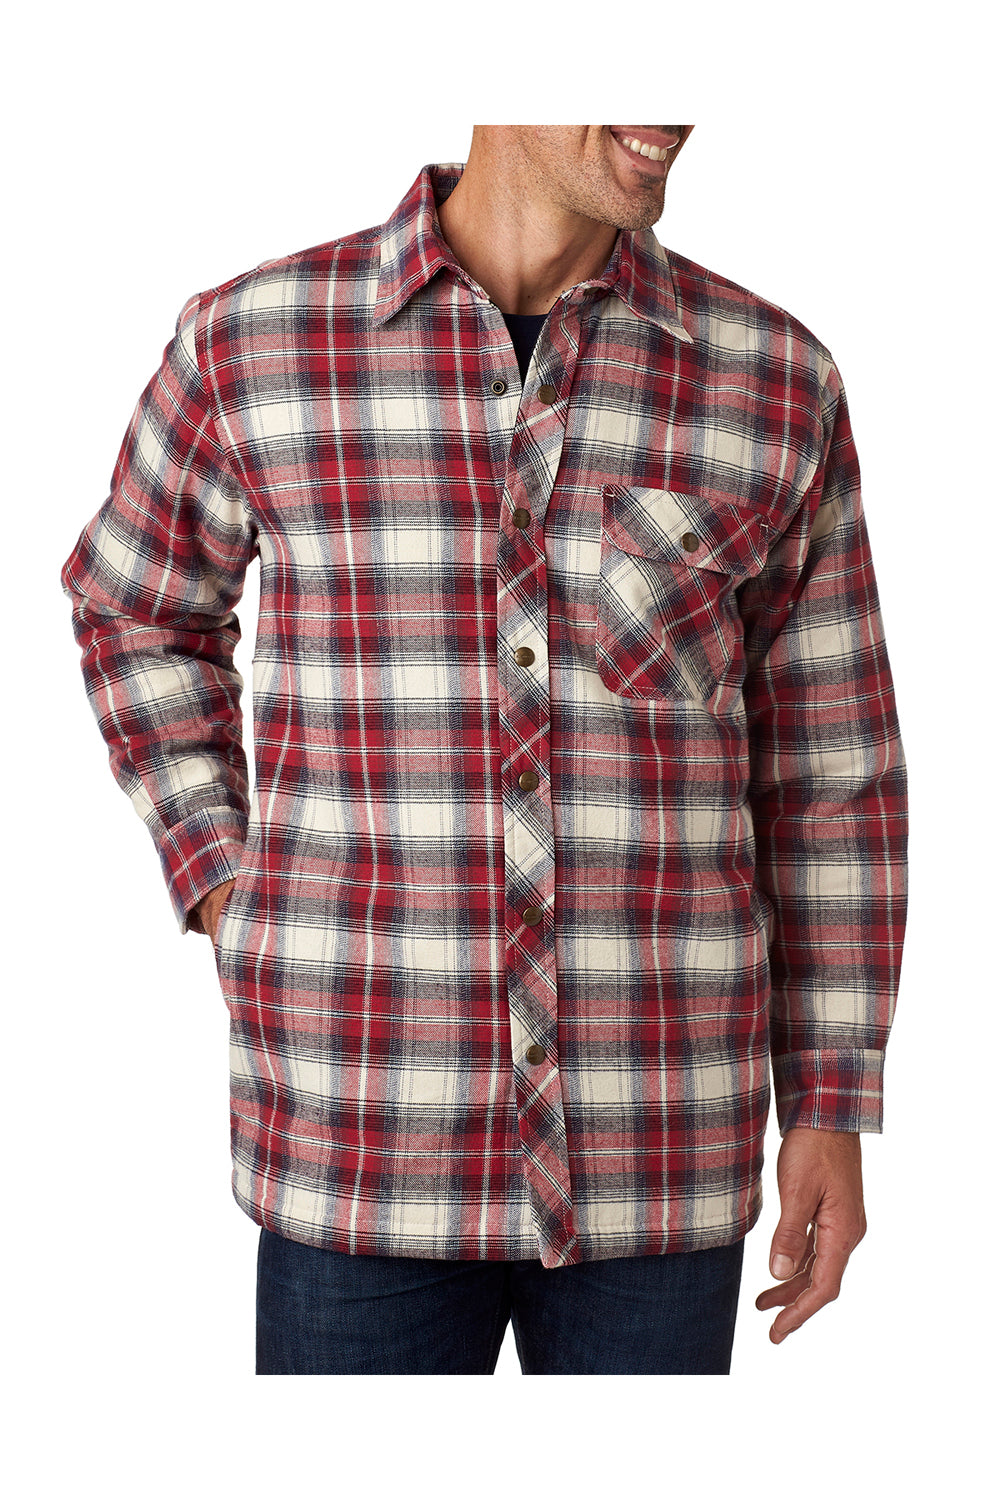 Backpacker BP7002 Mens Flannel Button Down Shirt Jacket Independent Red Front